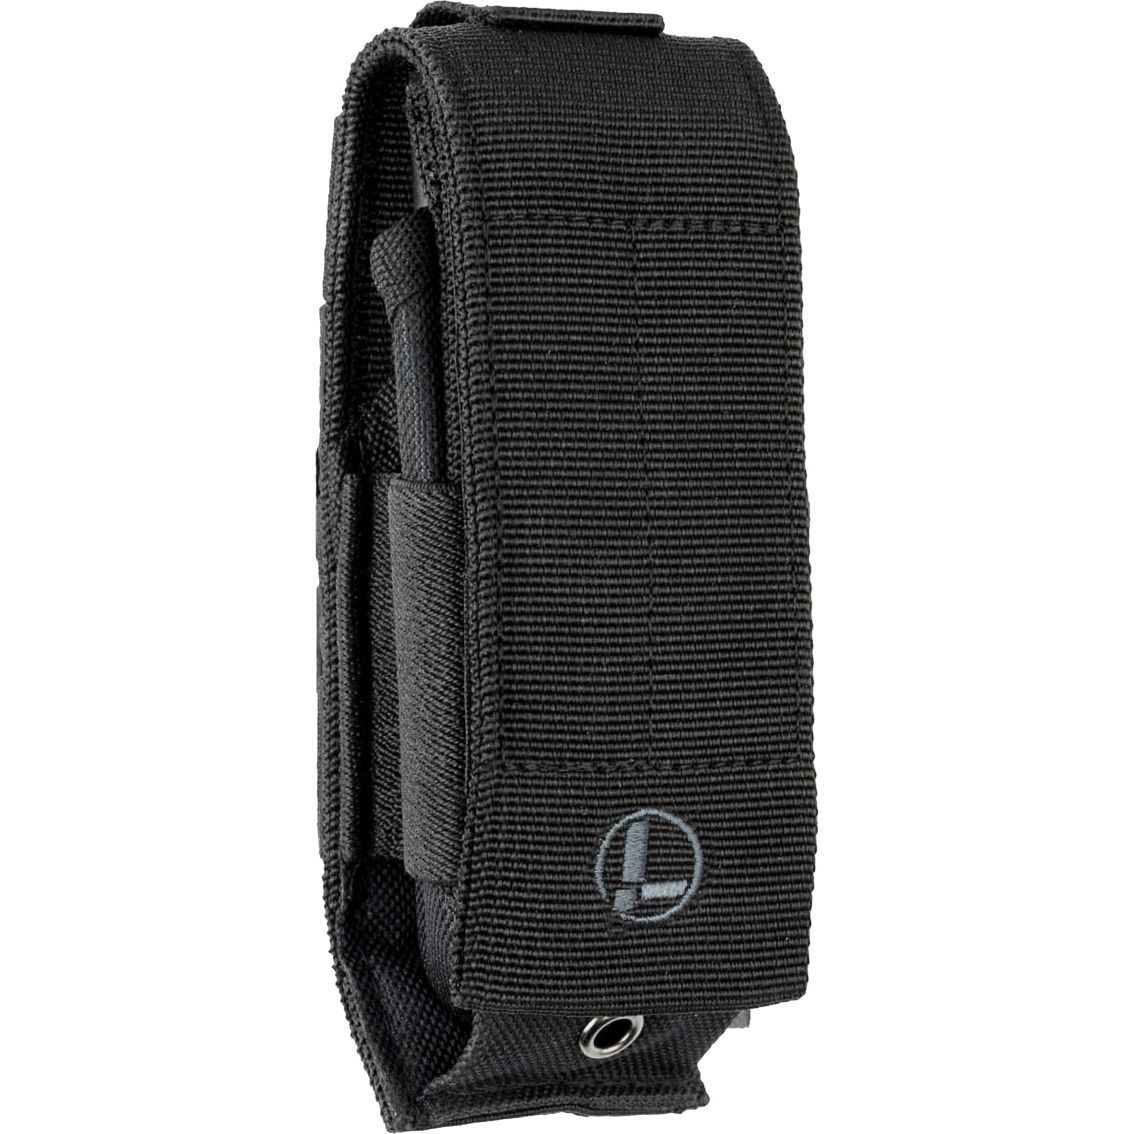 Leatherman Tool Group MUT USA with MOLLE Sheath - Image 6 of 6